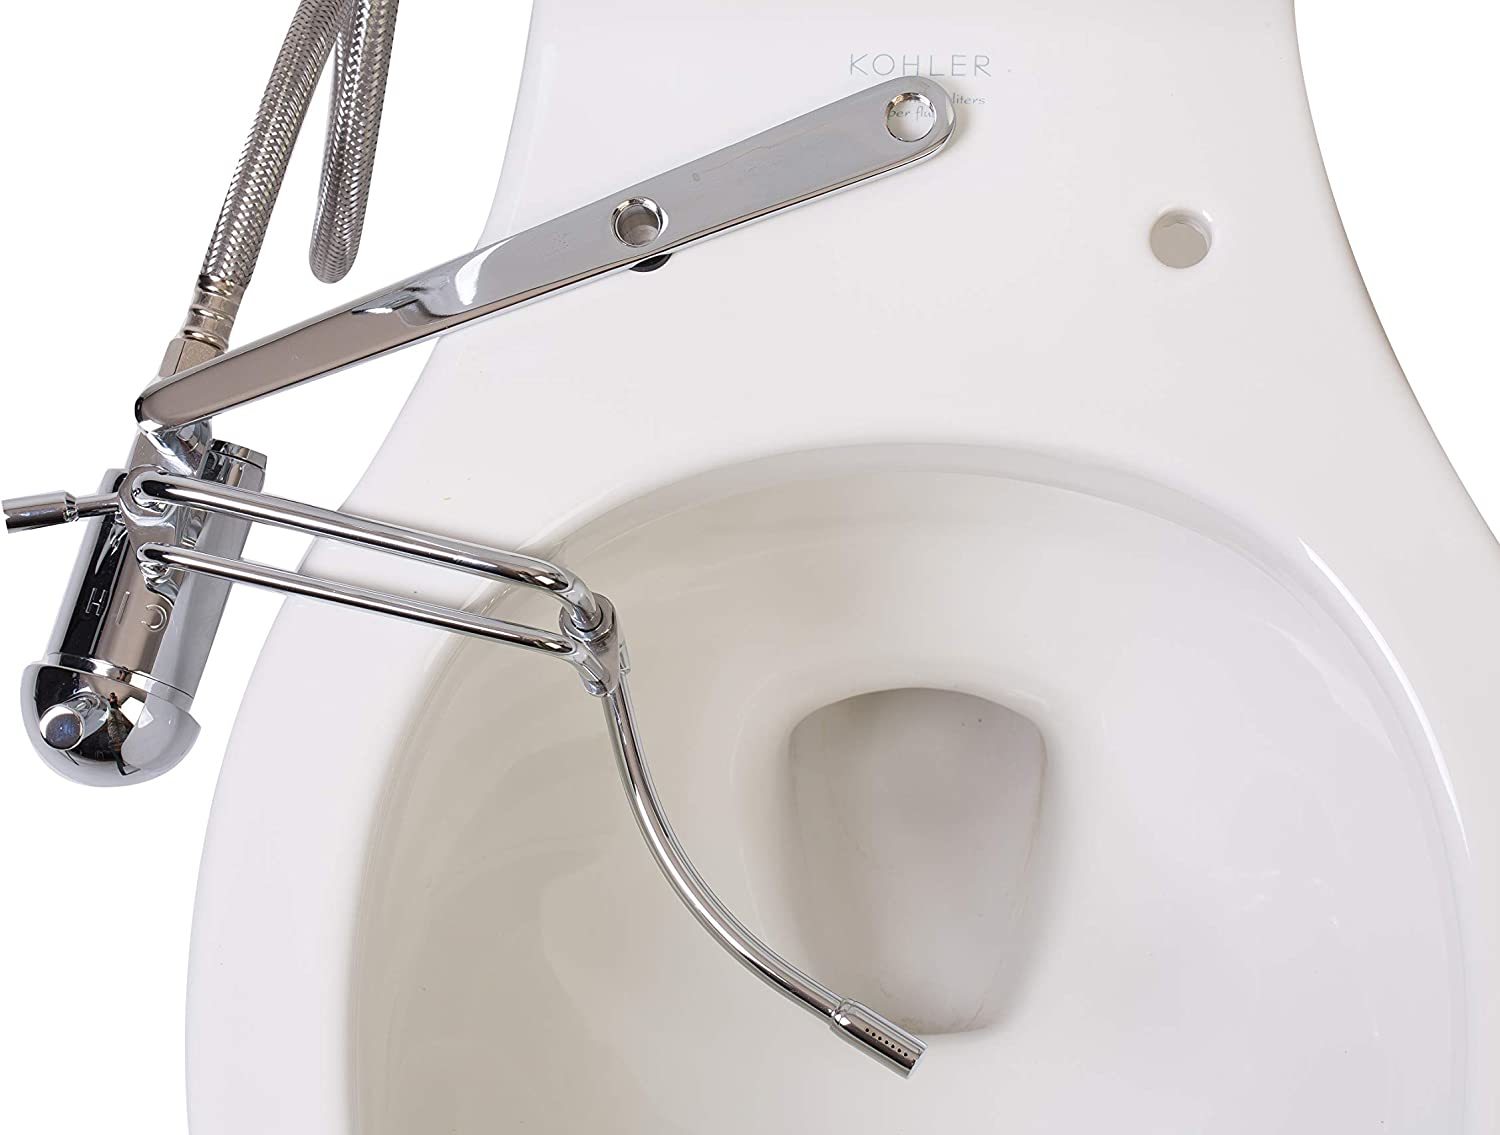 The Gobidet 2003C All Metal Bidet Attachment and 50 similar items